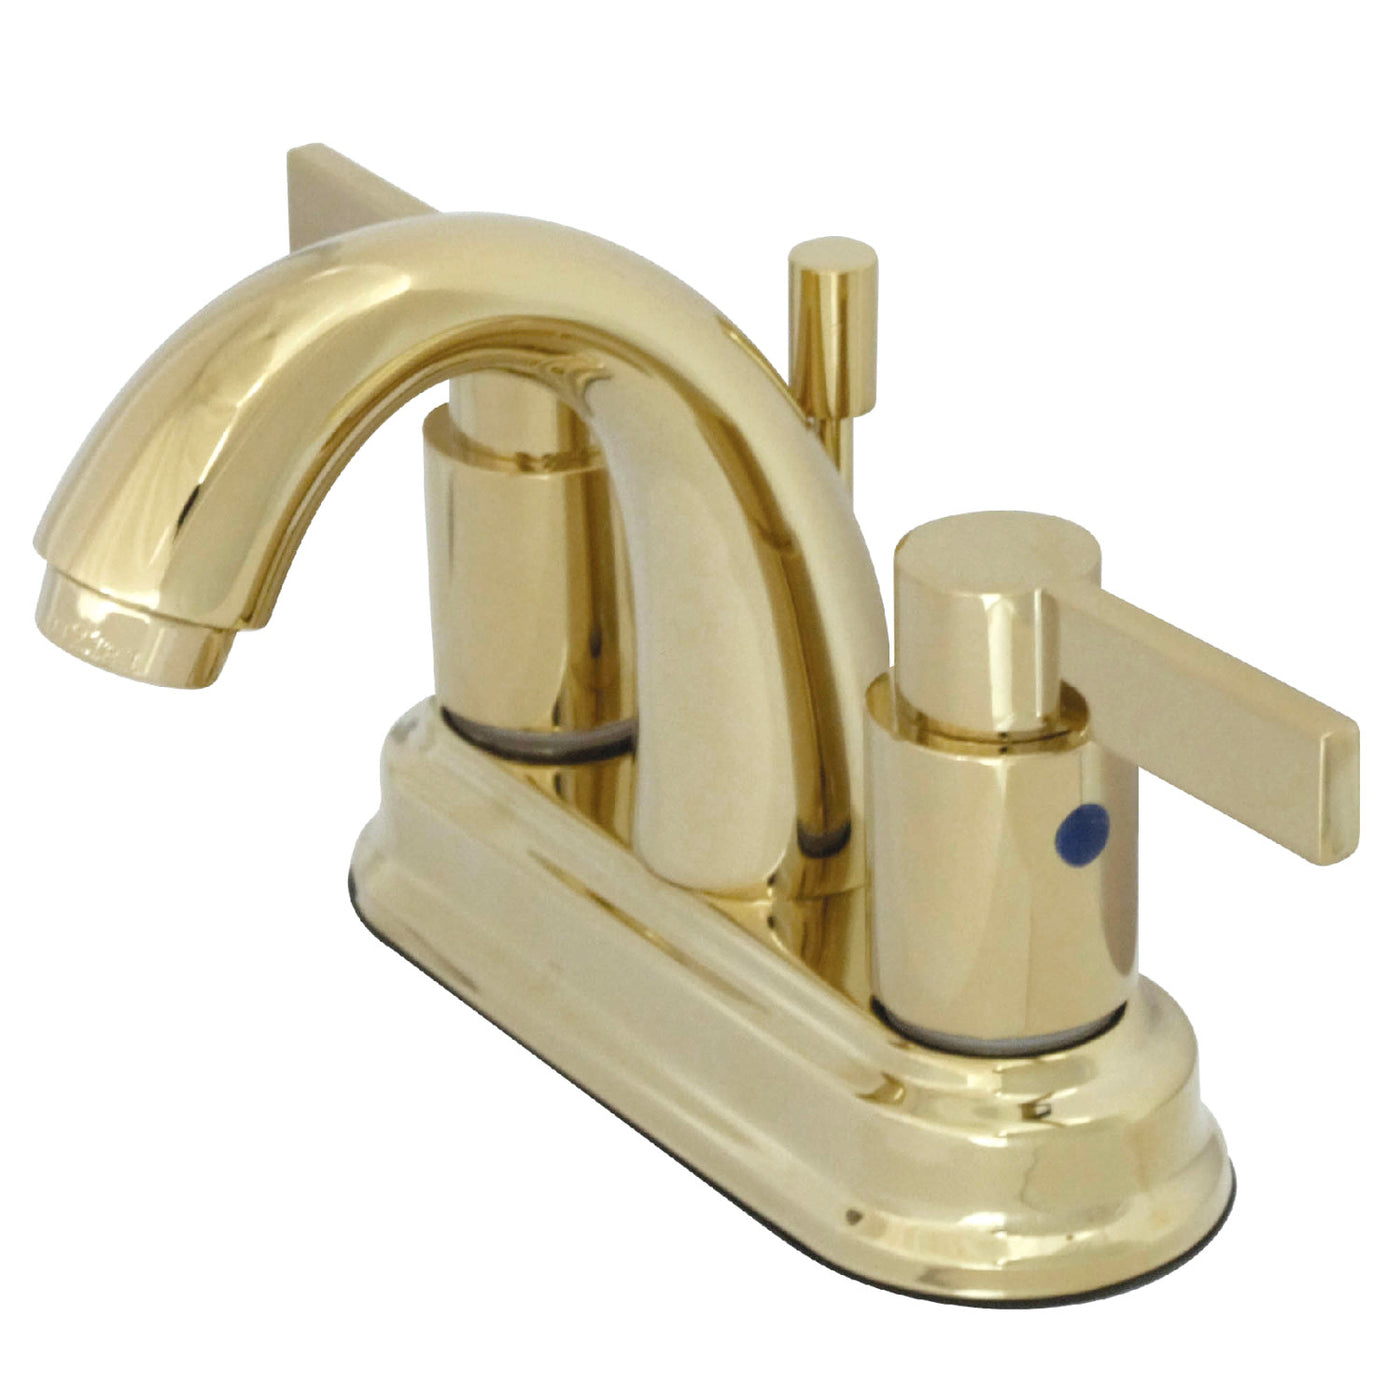 Elements of Design EB8612NDL 4-Inch Centerset Bathroom Faucet with Retail Pop-Up, Polished Brass